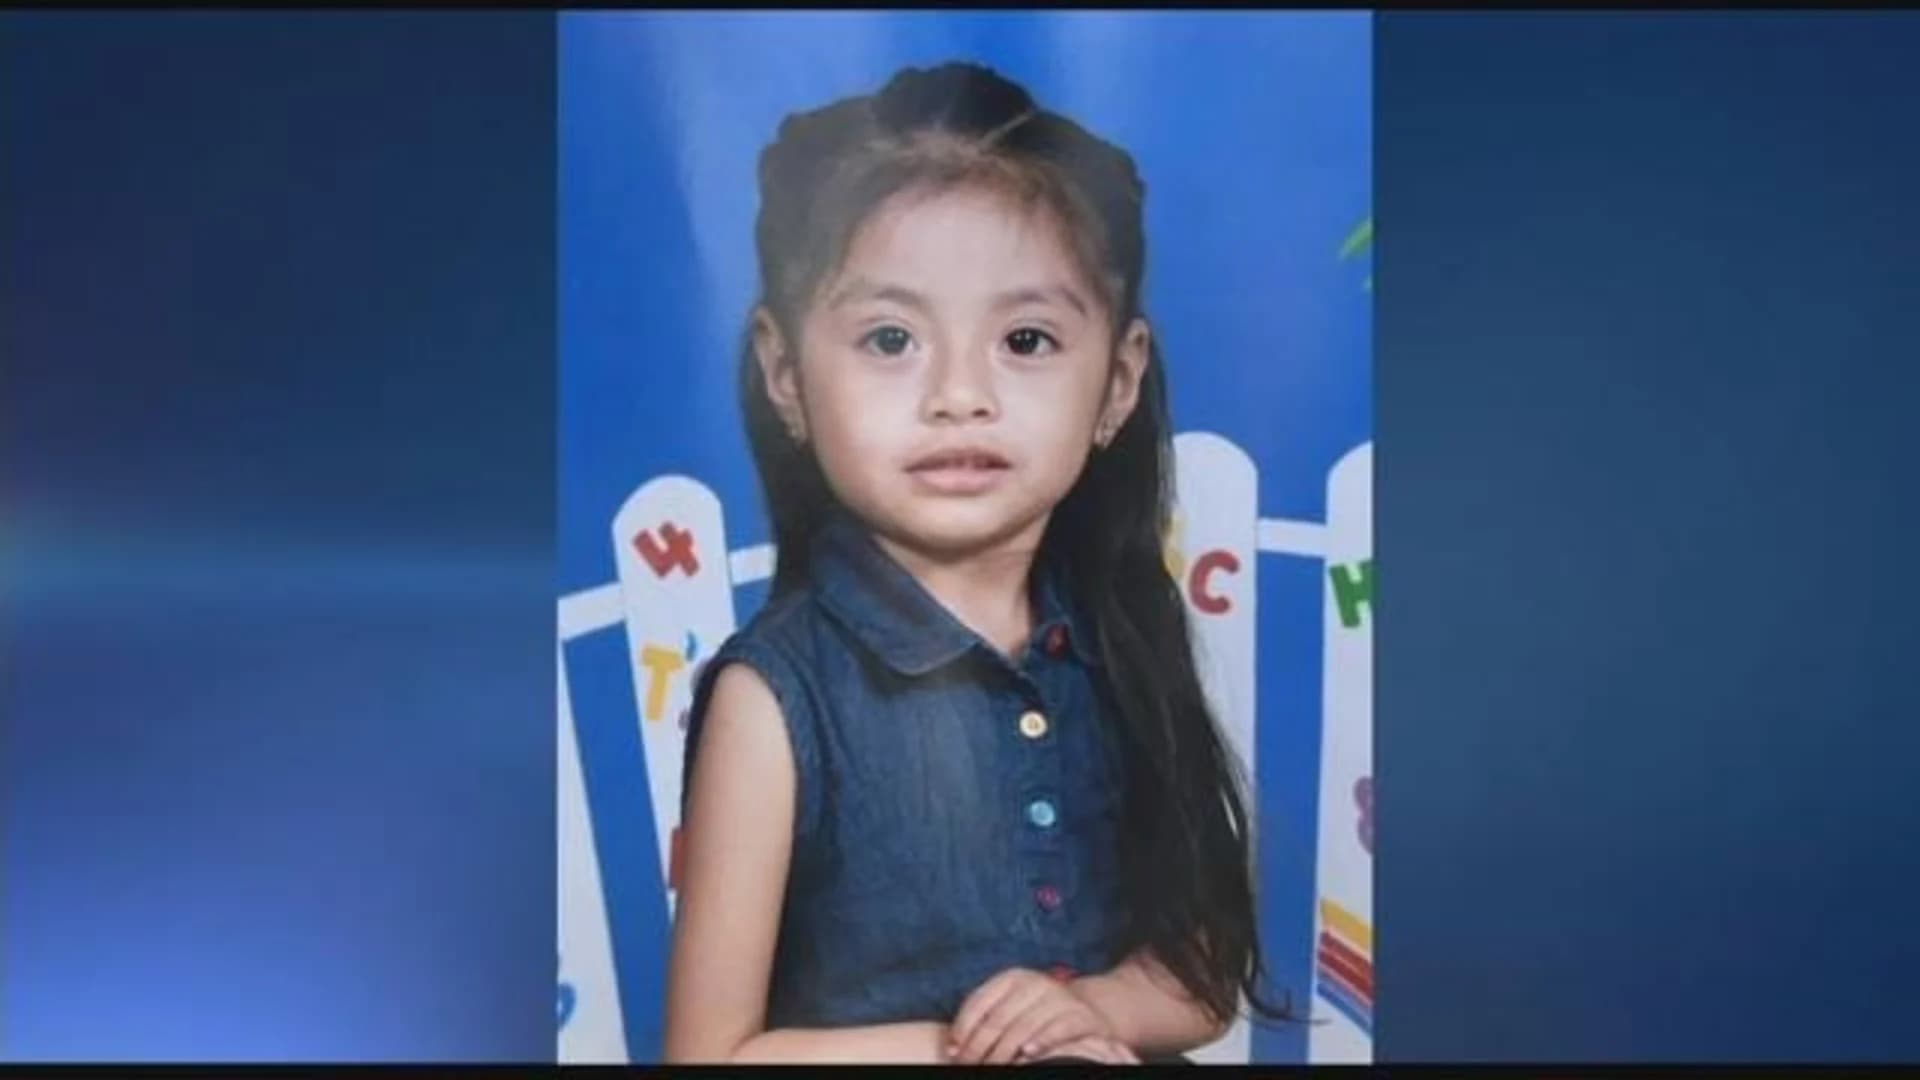 Activists demand traffic safety improvements after little girl’s death